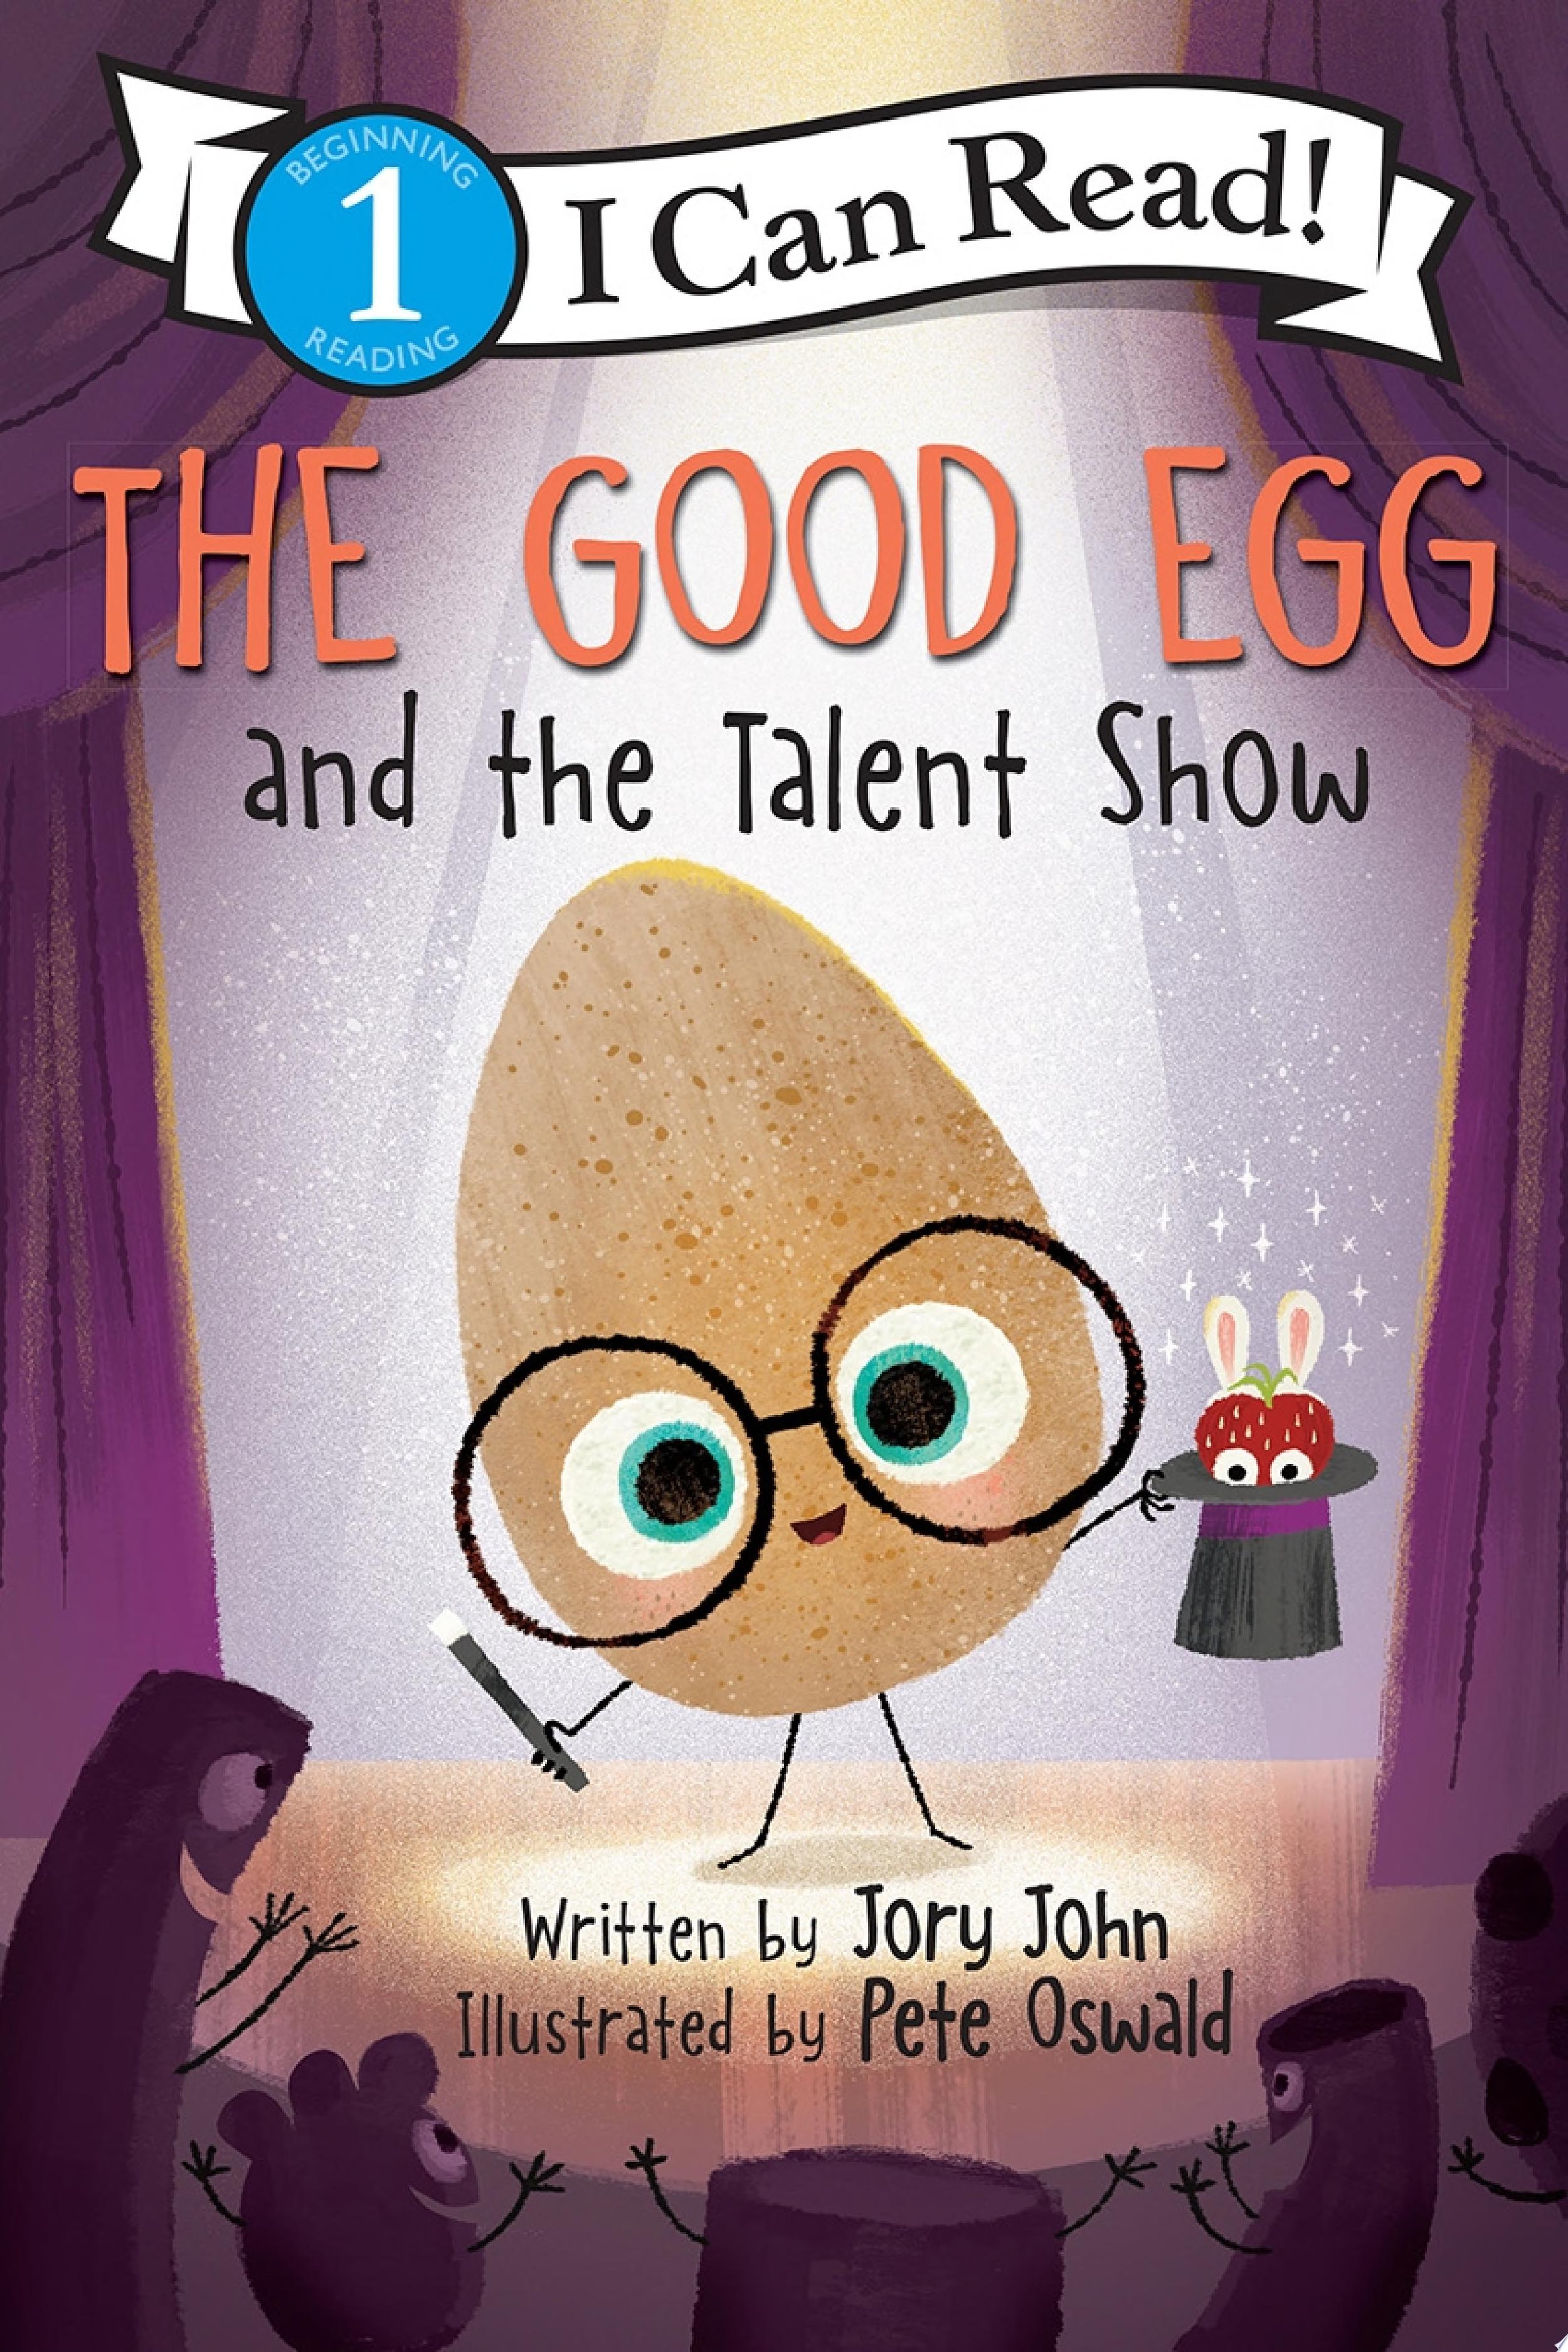 Image for "The Good Egg and the Talent Show"